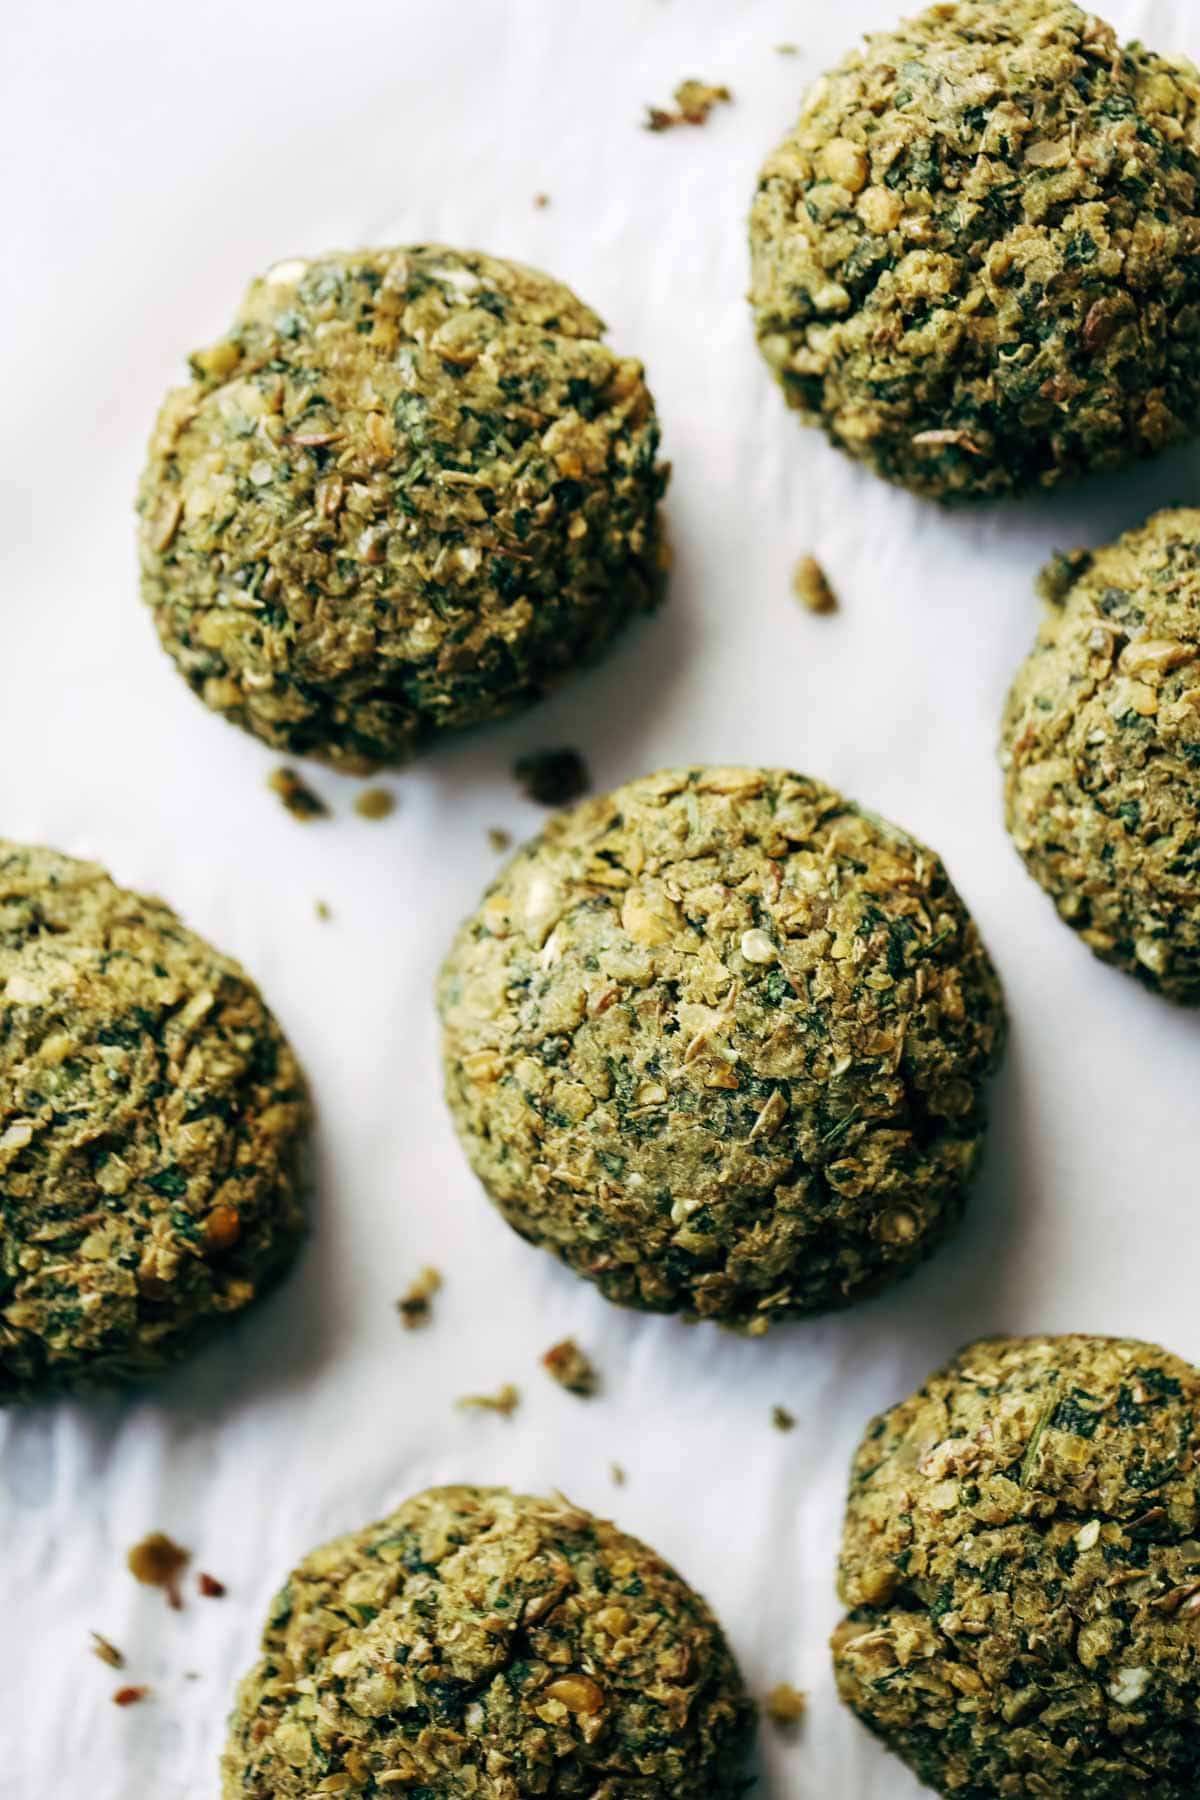 Easy baked falafel at home in 30 minutes WITHOUT deep frying! Features lentils, herbs, garlic, lemon juice. Use in salads, sandwiches, healthy recipes. | pinchofyum.com